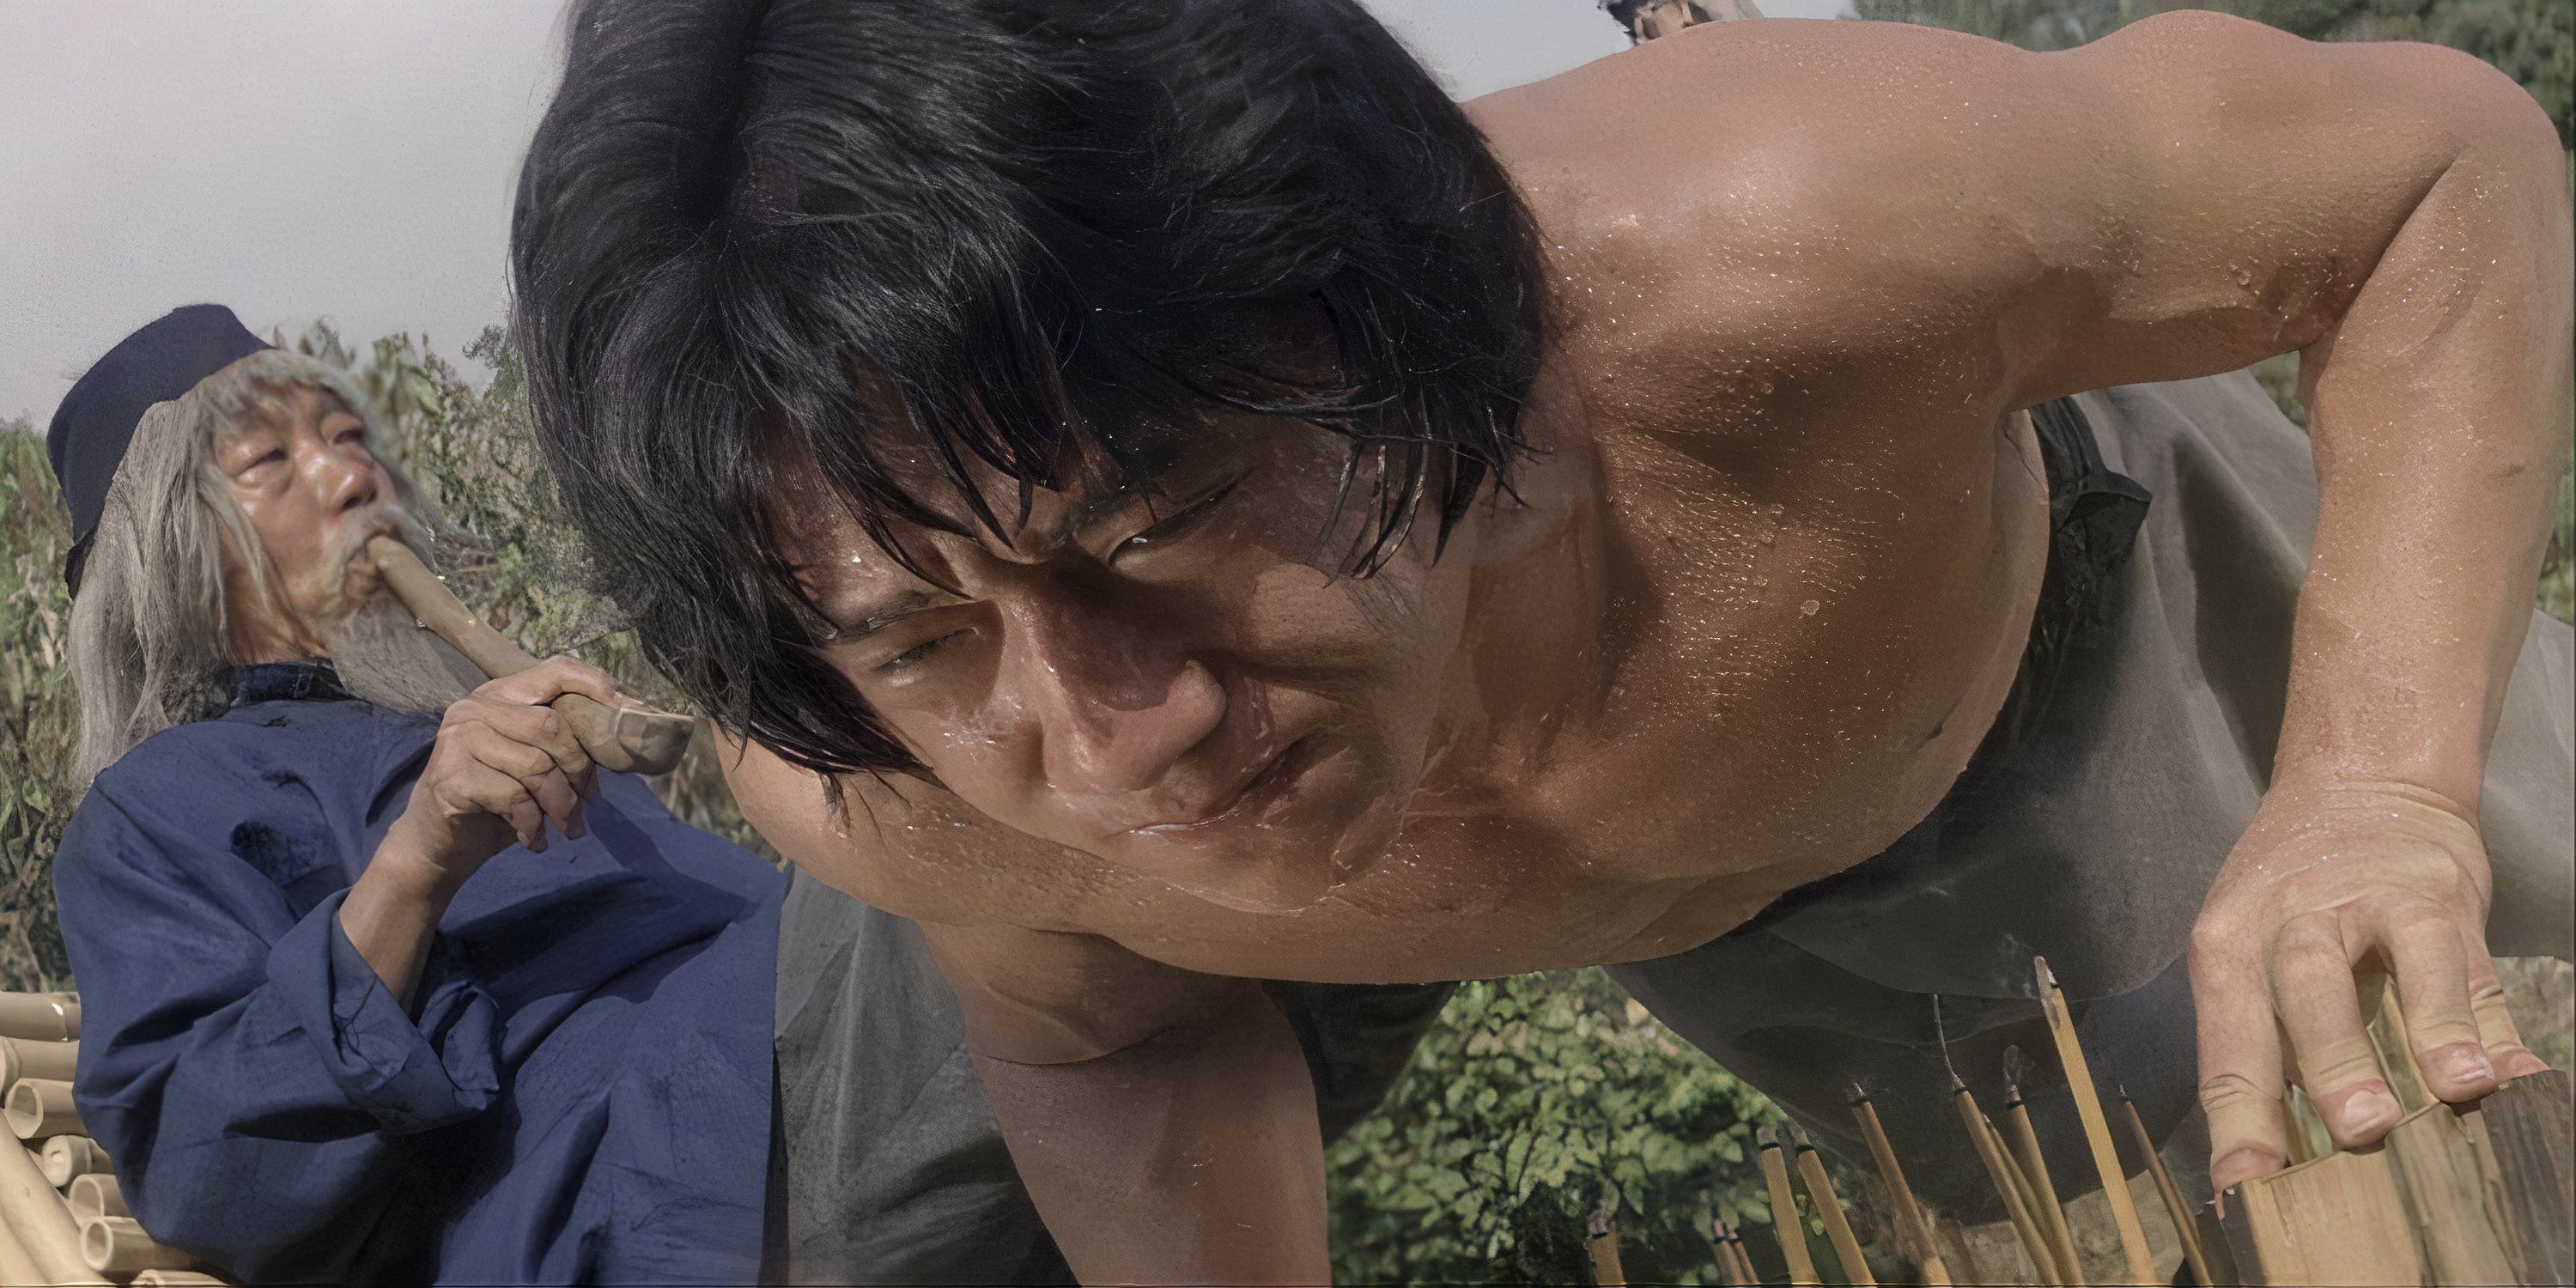 Jackie Chan struggles to do pushups as an old man smokes a pipe next to him in Snake in the Eagle's Shadow.